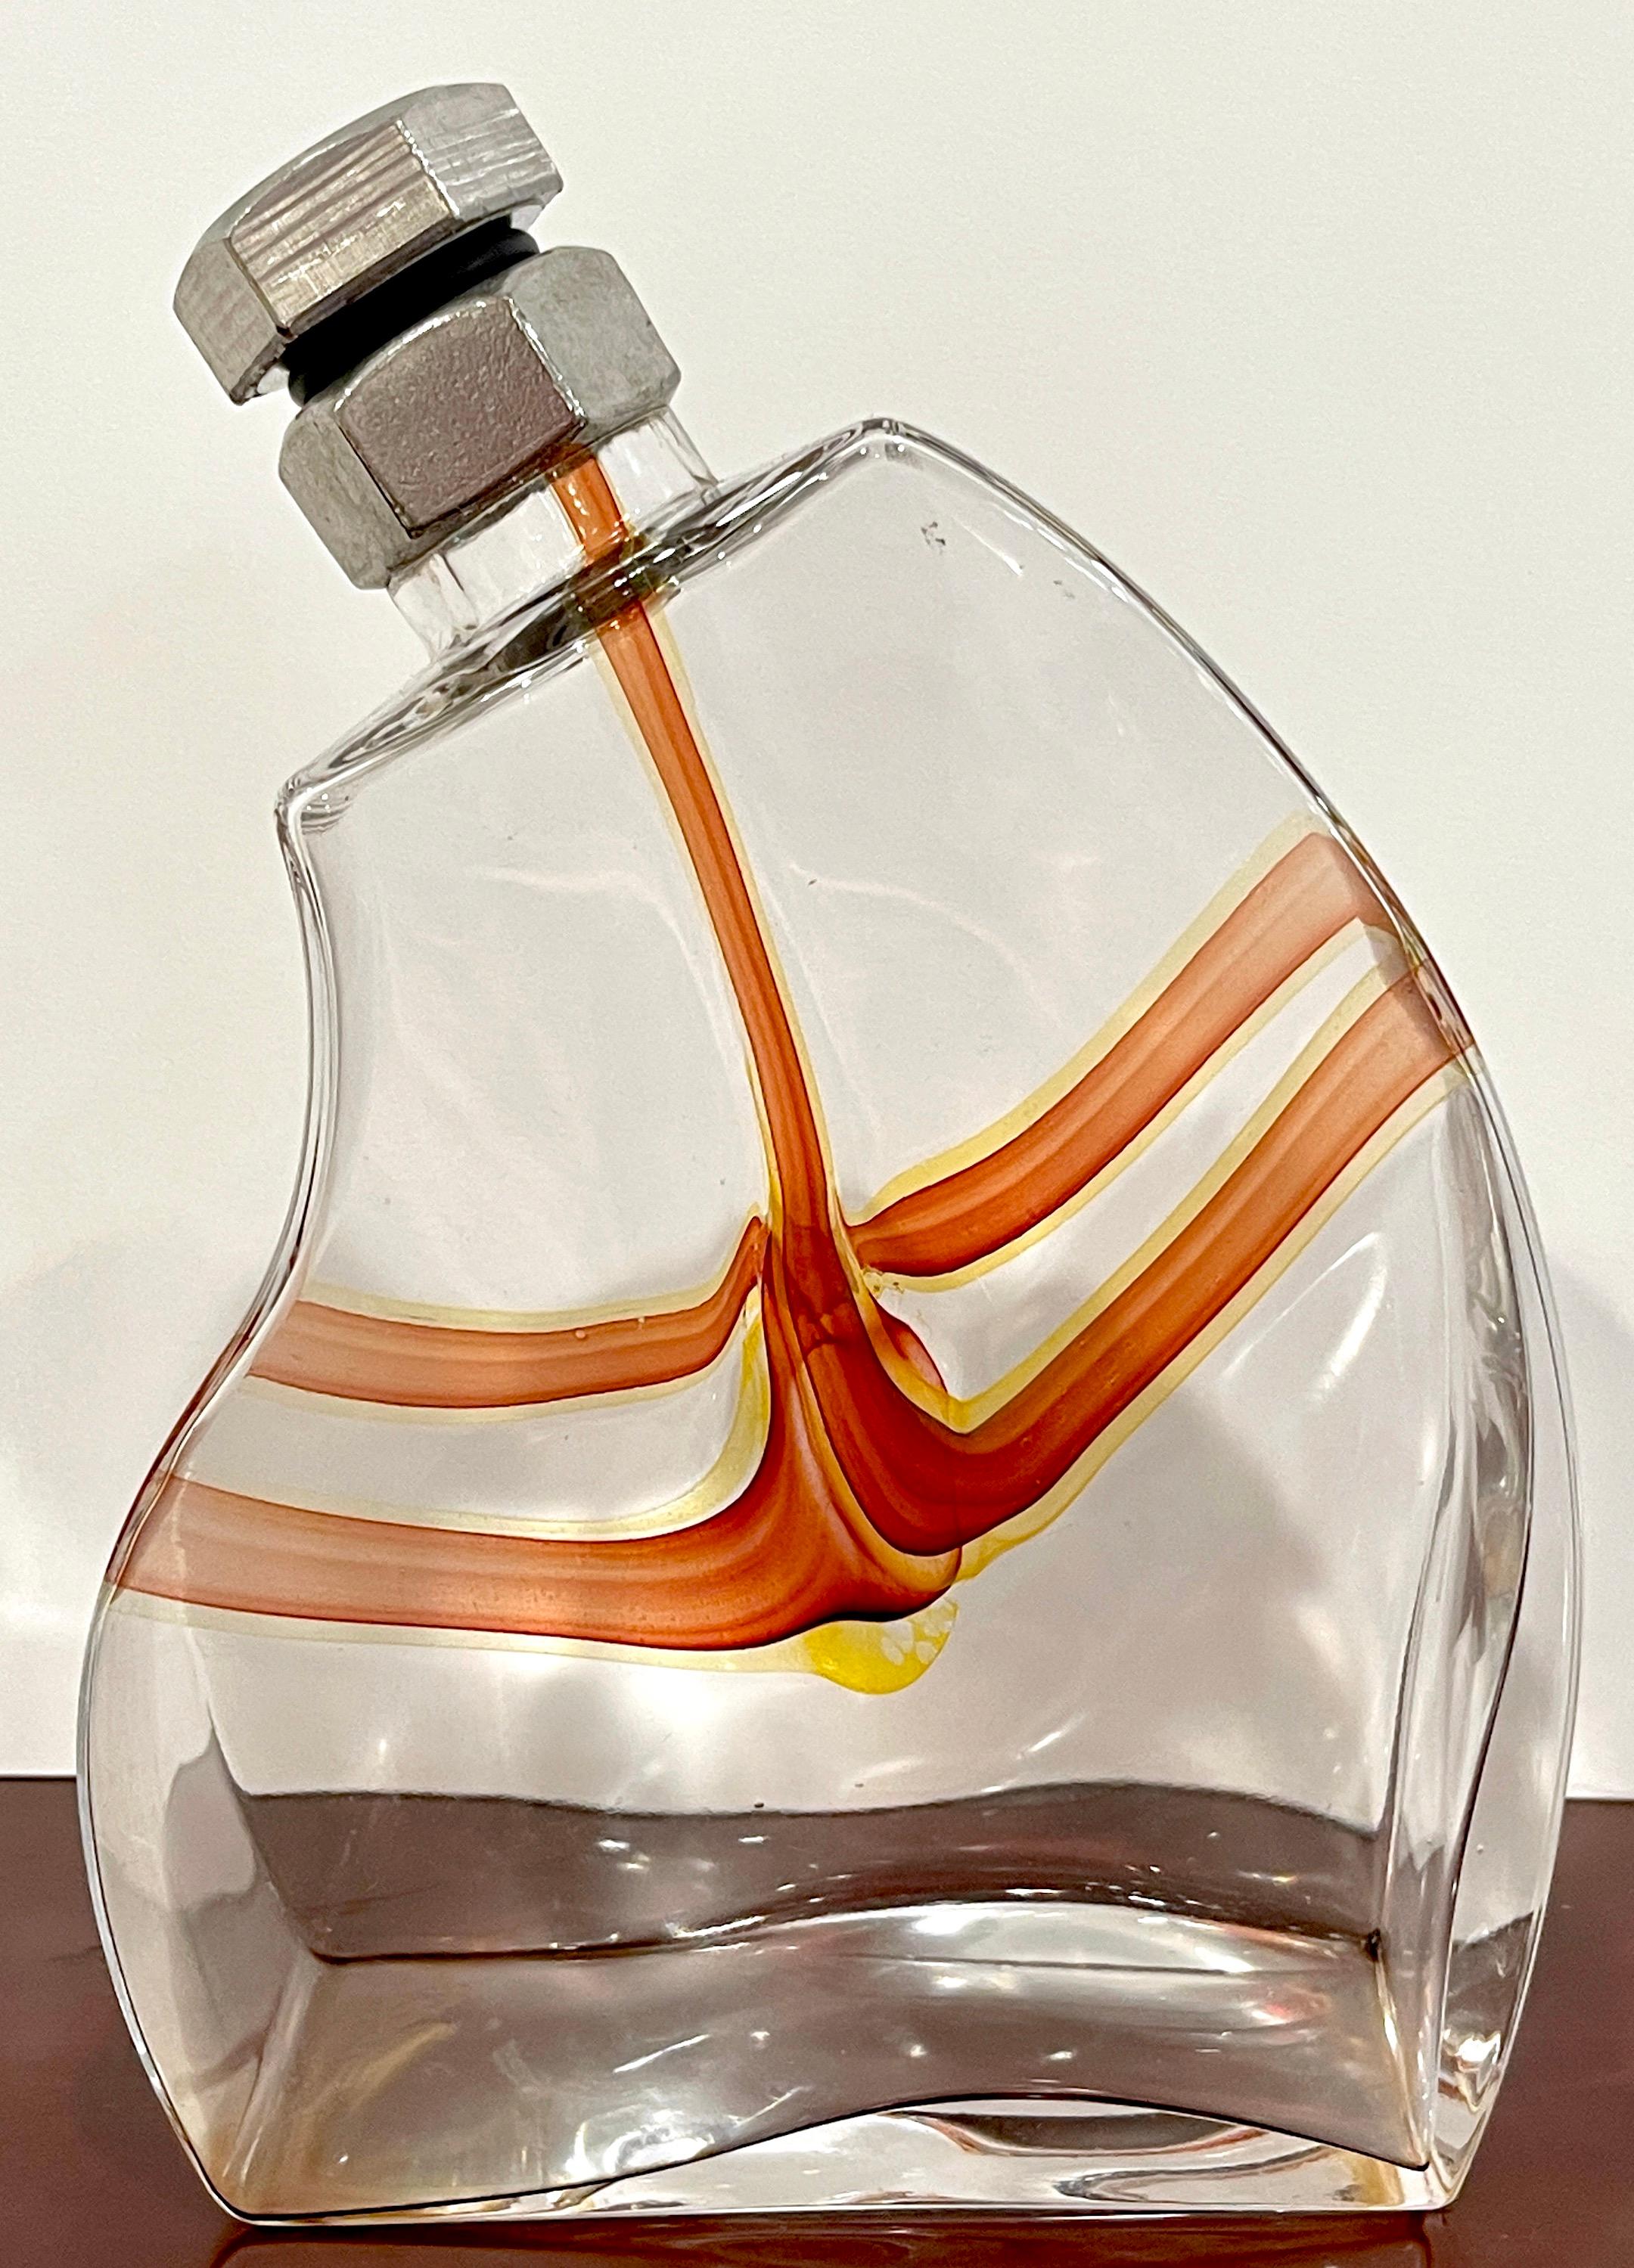 'Macho' Decanter by Kjell Engman for Kosta Boda 
Kjell Engman’s Macho Series 2000-2011

The 'Macho' Decanter by Kjell Engman for Kosta Boda is a stunning and iconic piece of glass artistry that belongs to Kjell Engman's acclaimed Macho Series, which